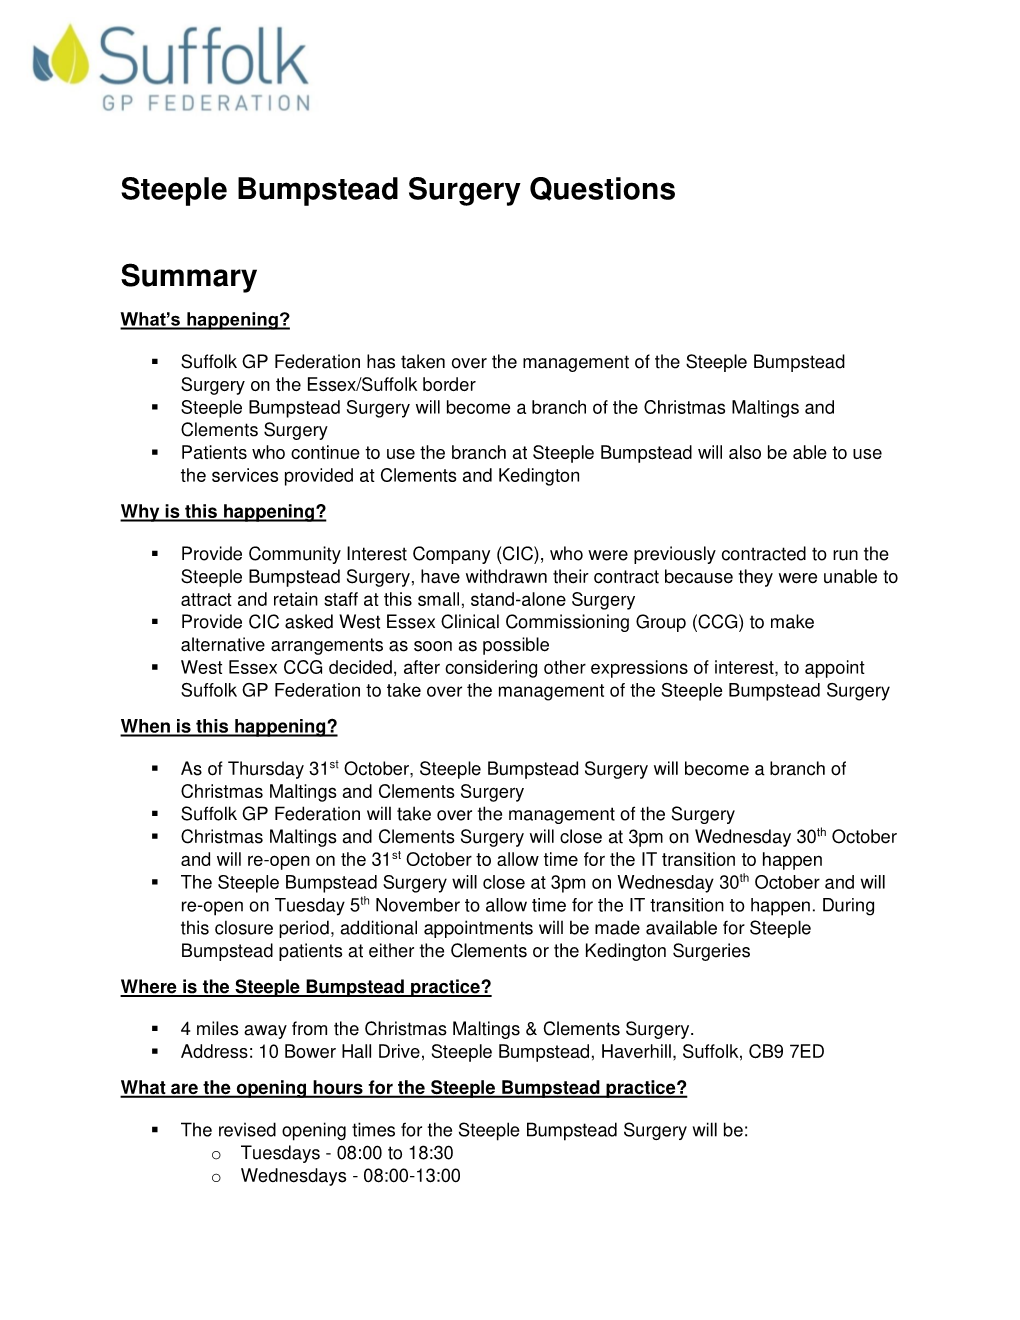 Steeple Bumpstead Surgery Questions Summary